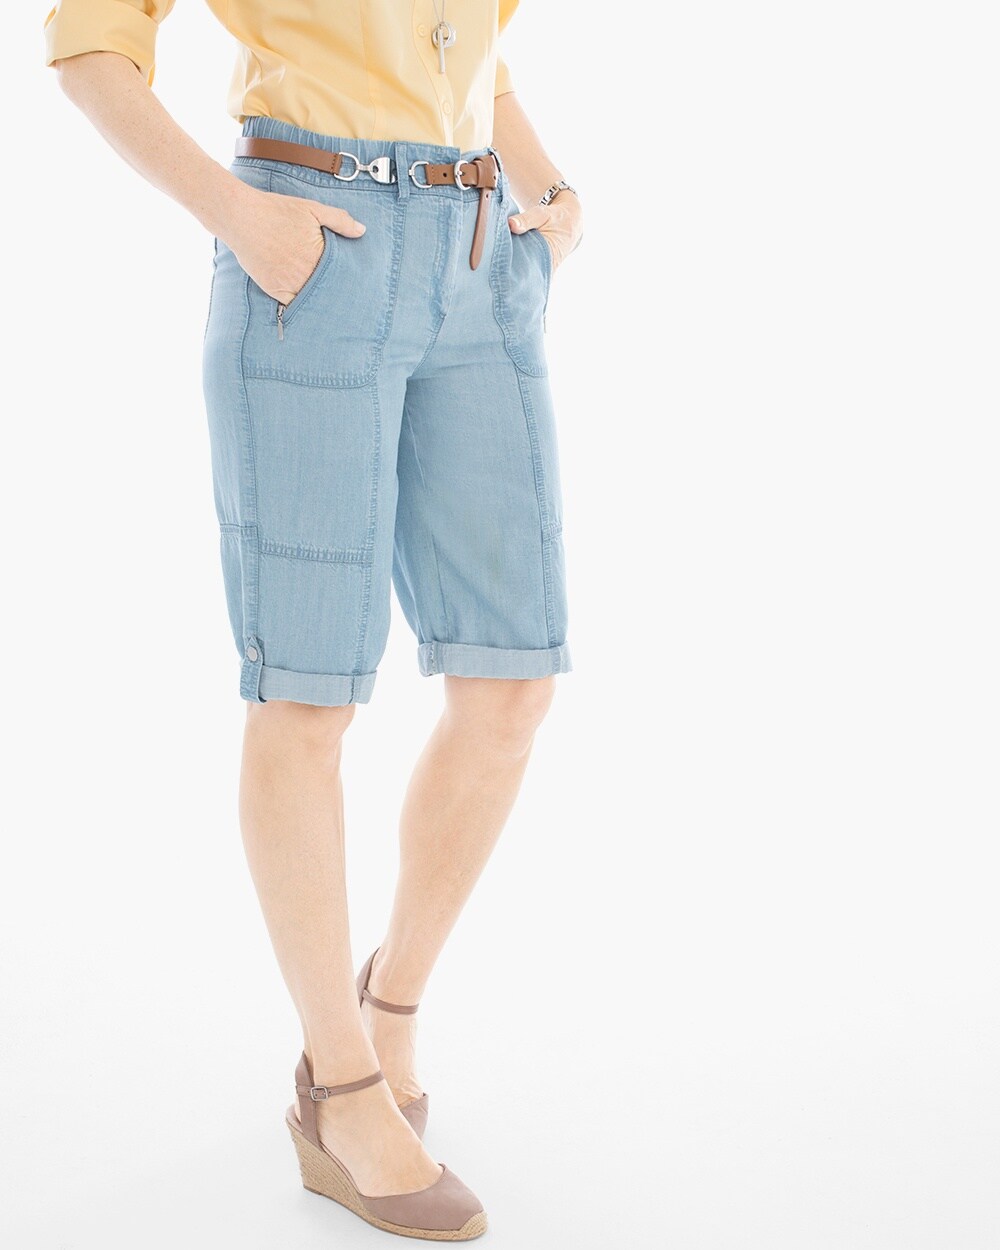 Casual Roll-Cuff Shorts in Chambray - 11 Inch Inseam